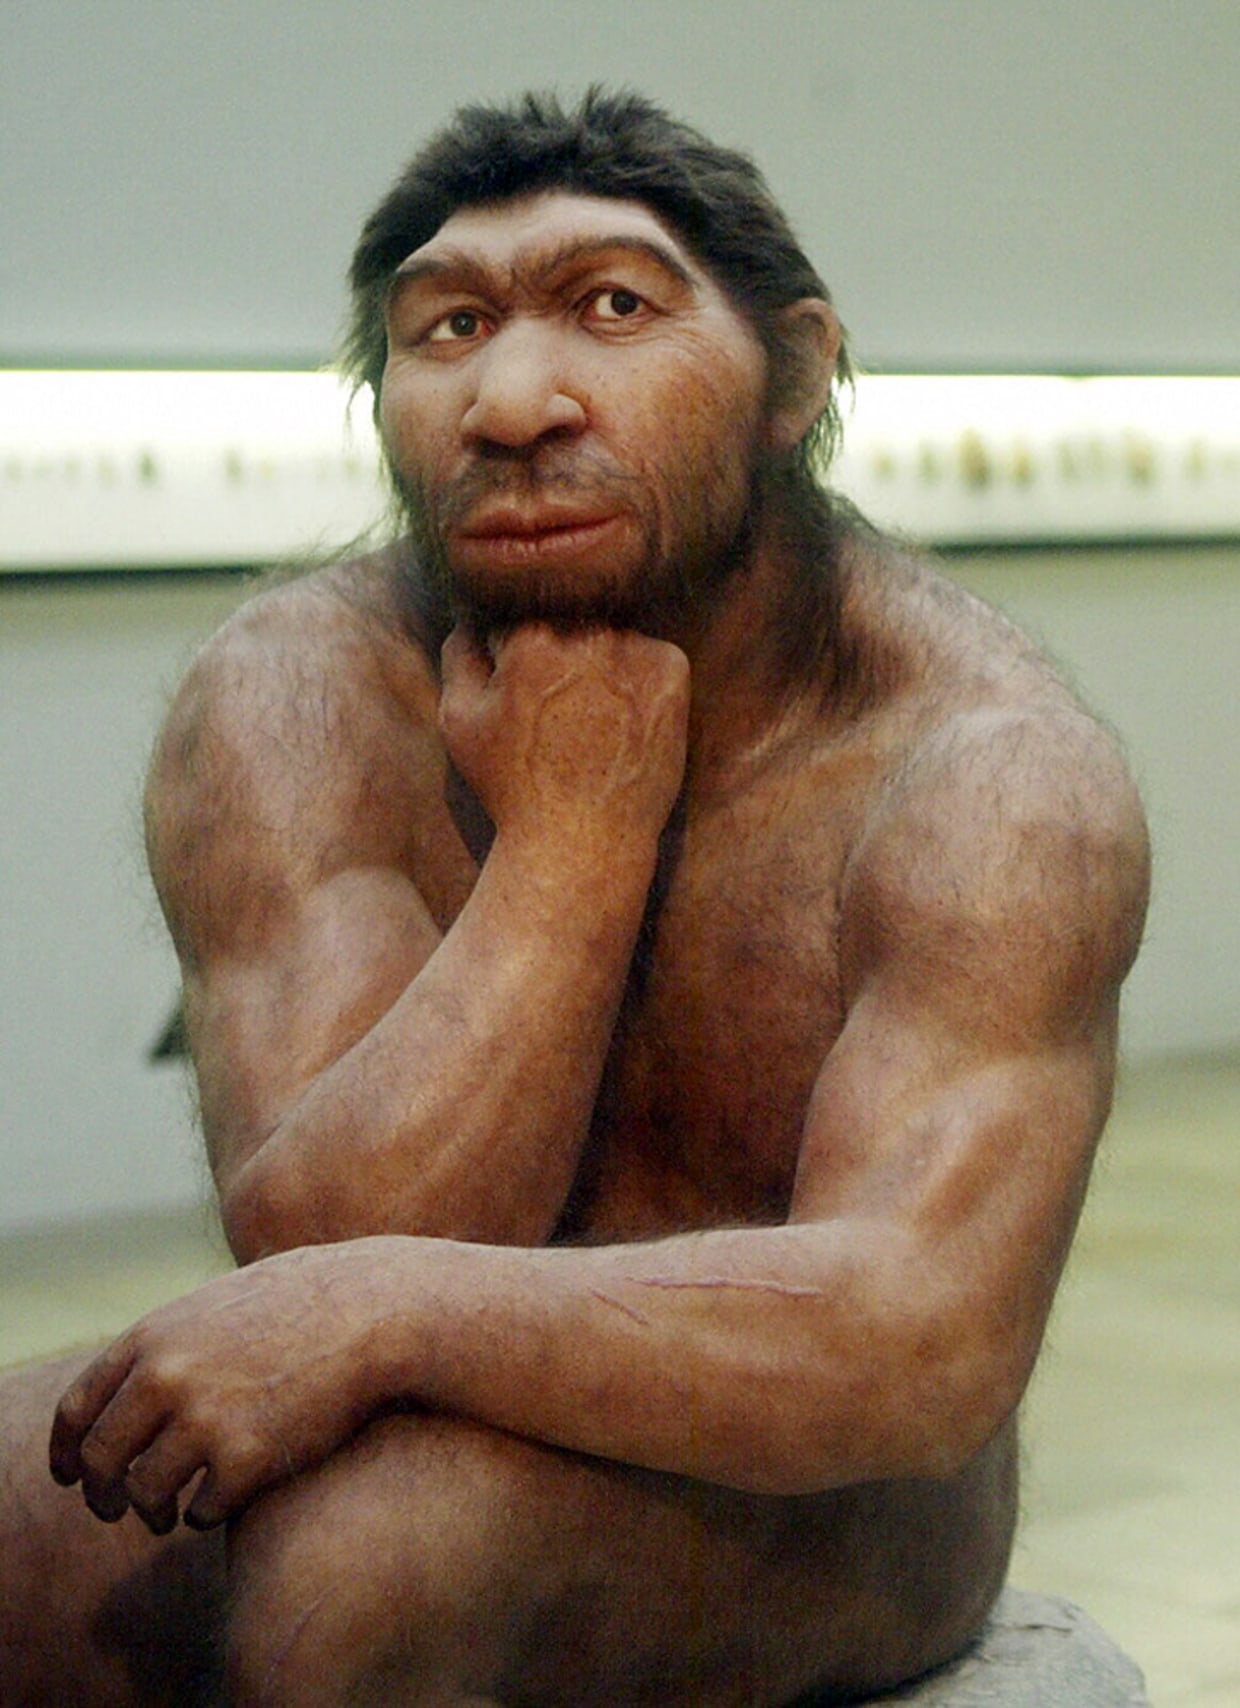 Prehistoric women had strong, bulky arms -- more powerful than